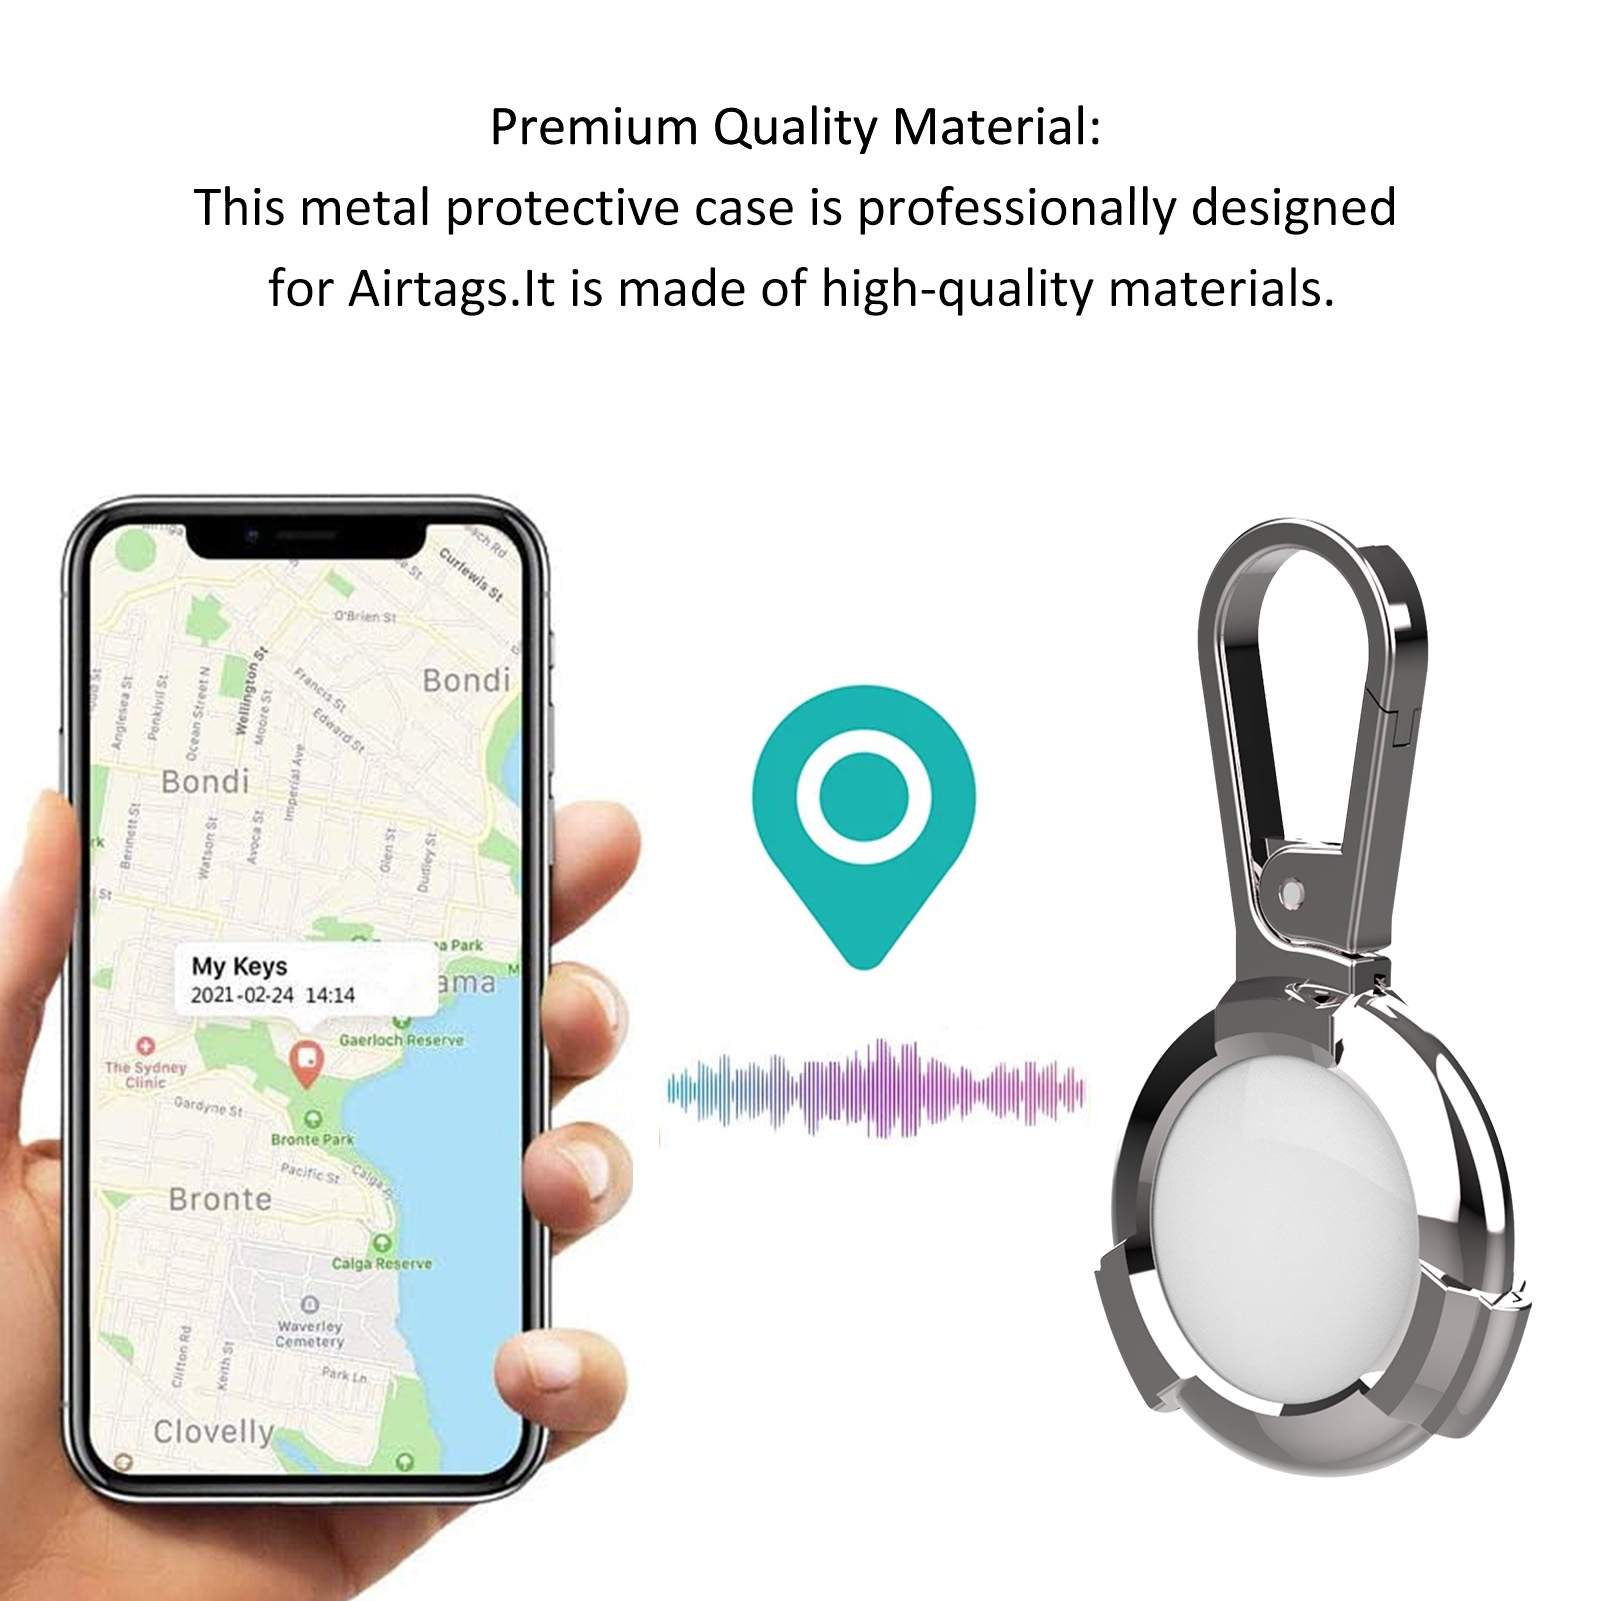 Metal-Protection-Cover-For-Apple-Airtags-Protective-Case-Sleeve-Anti-scratch-Anti-lost-Protector-She-1852054-3